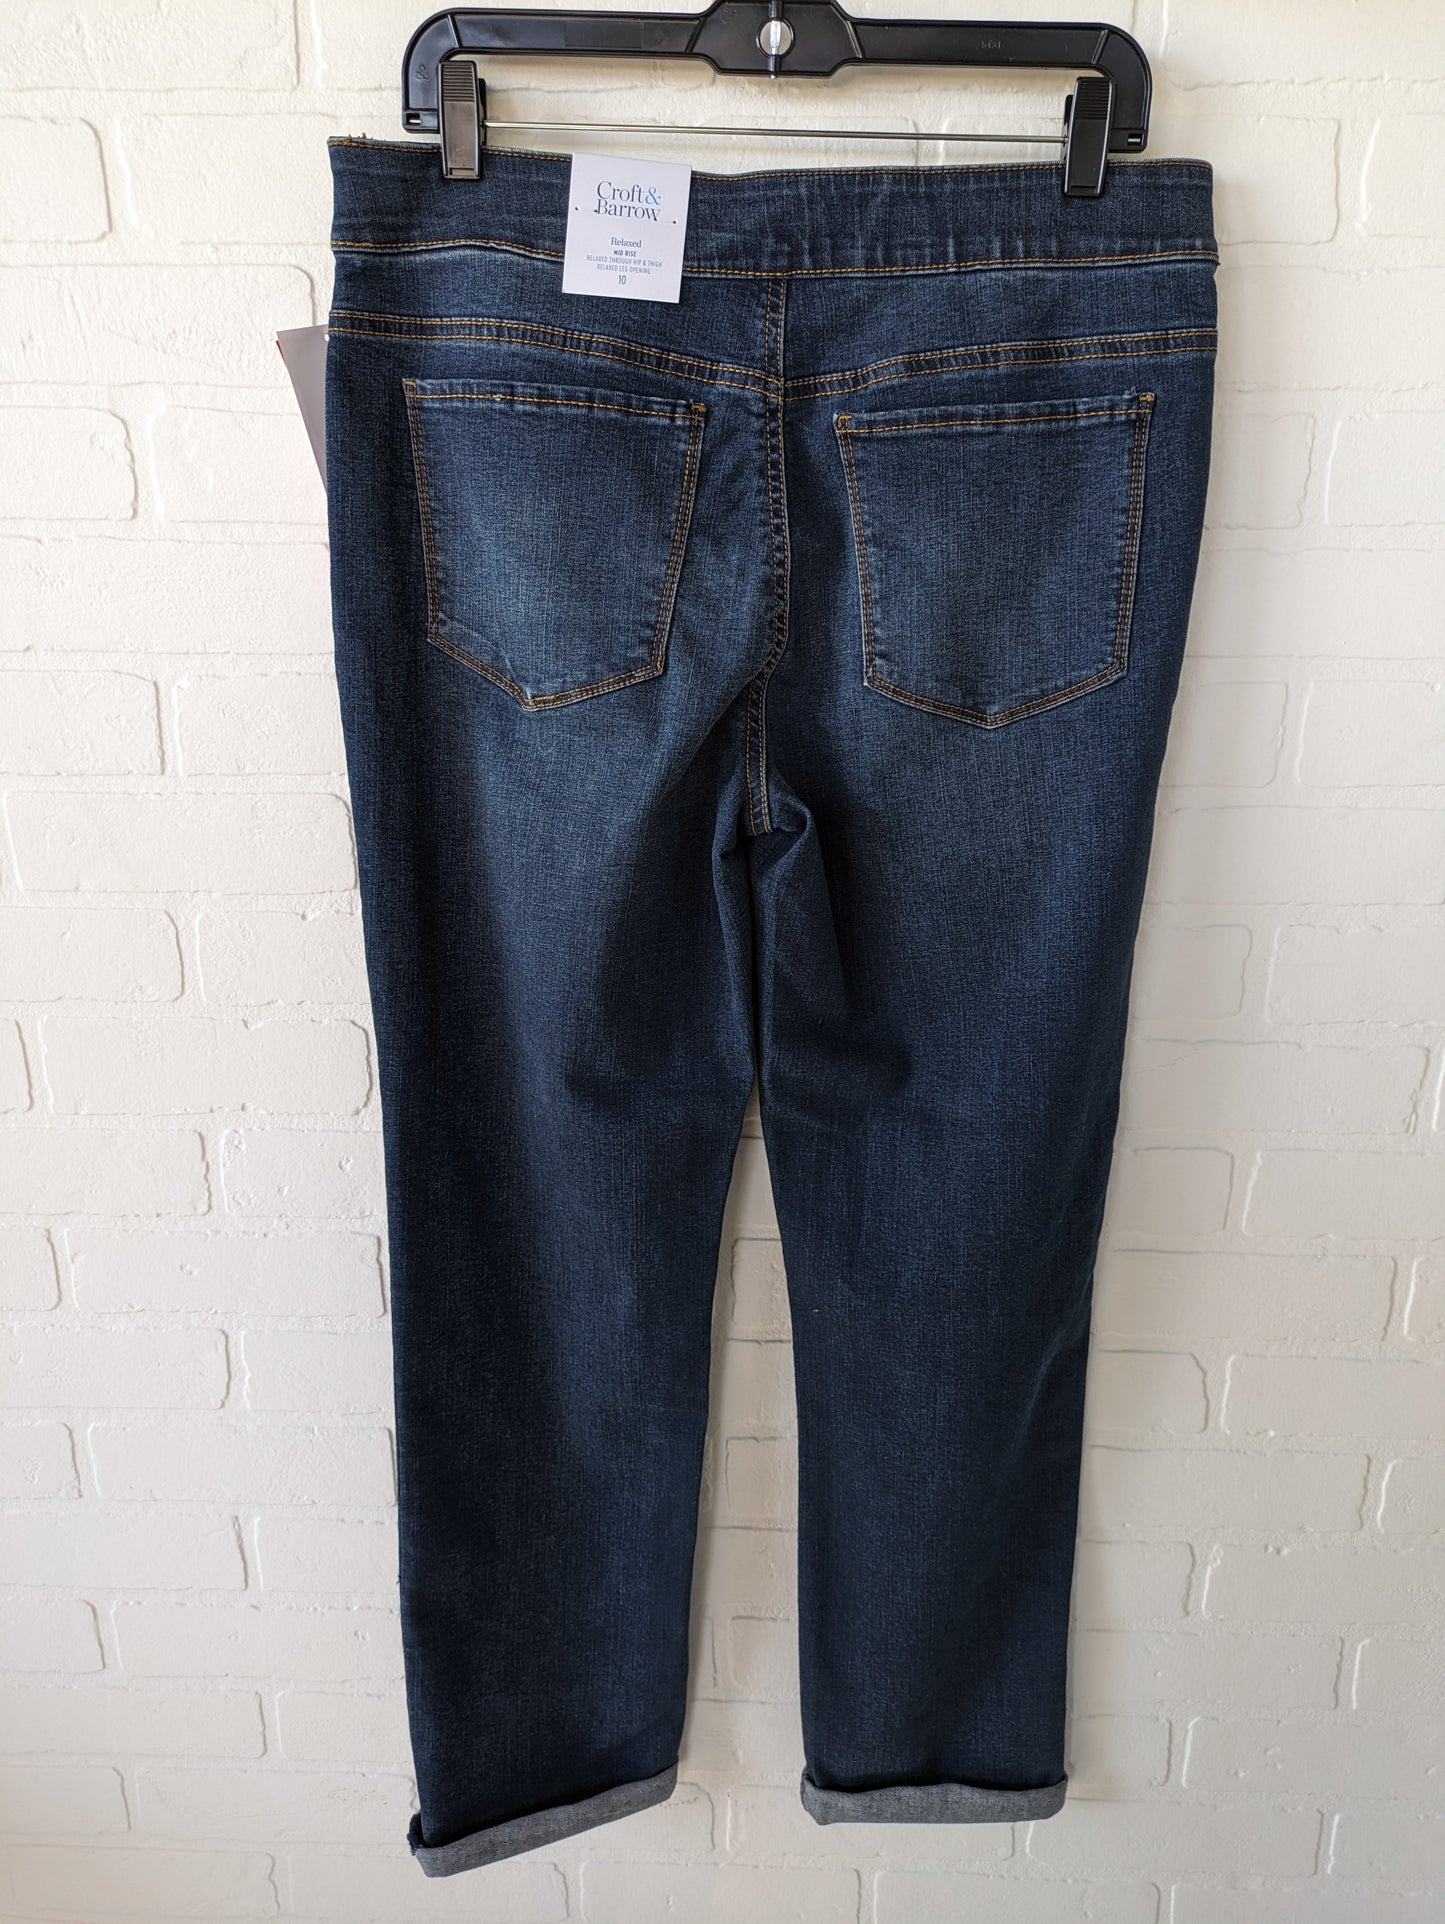 Jeans Skinny By Croft And Barrow  Size: 10